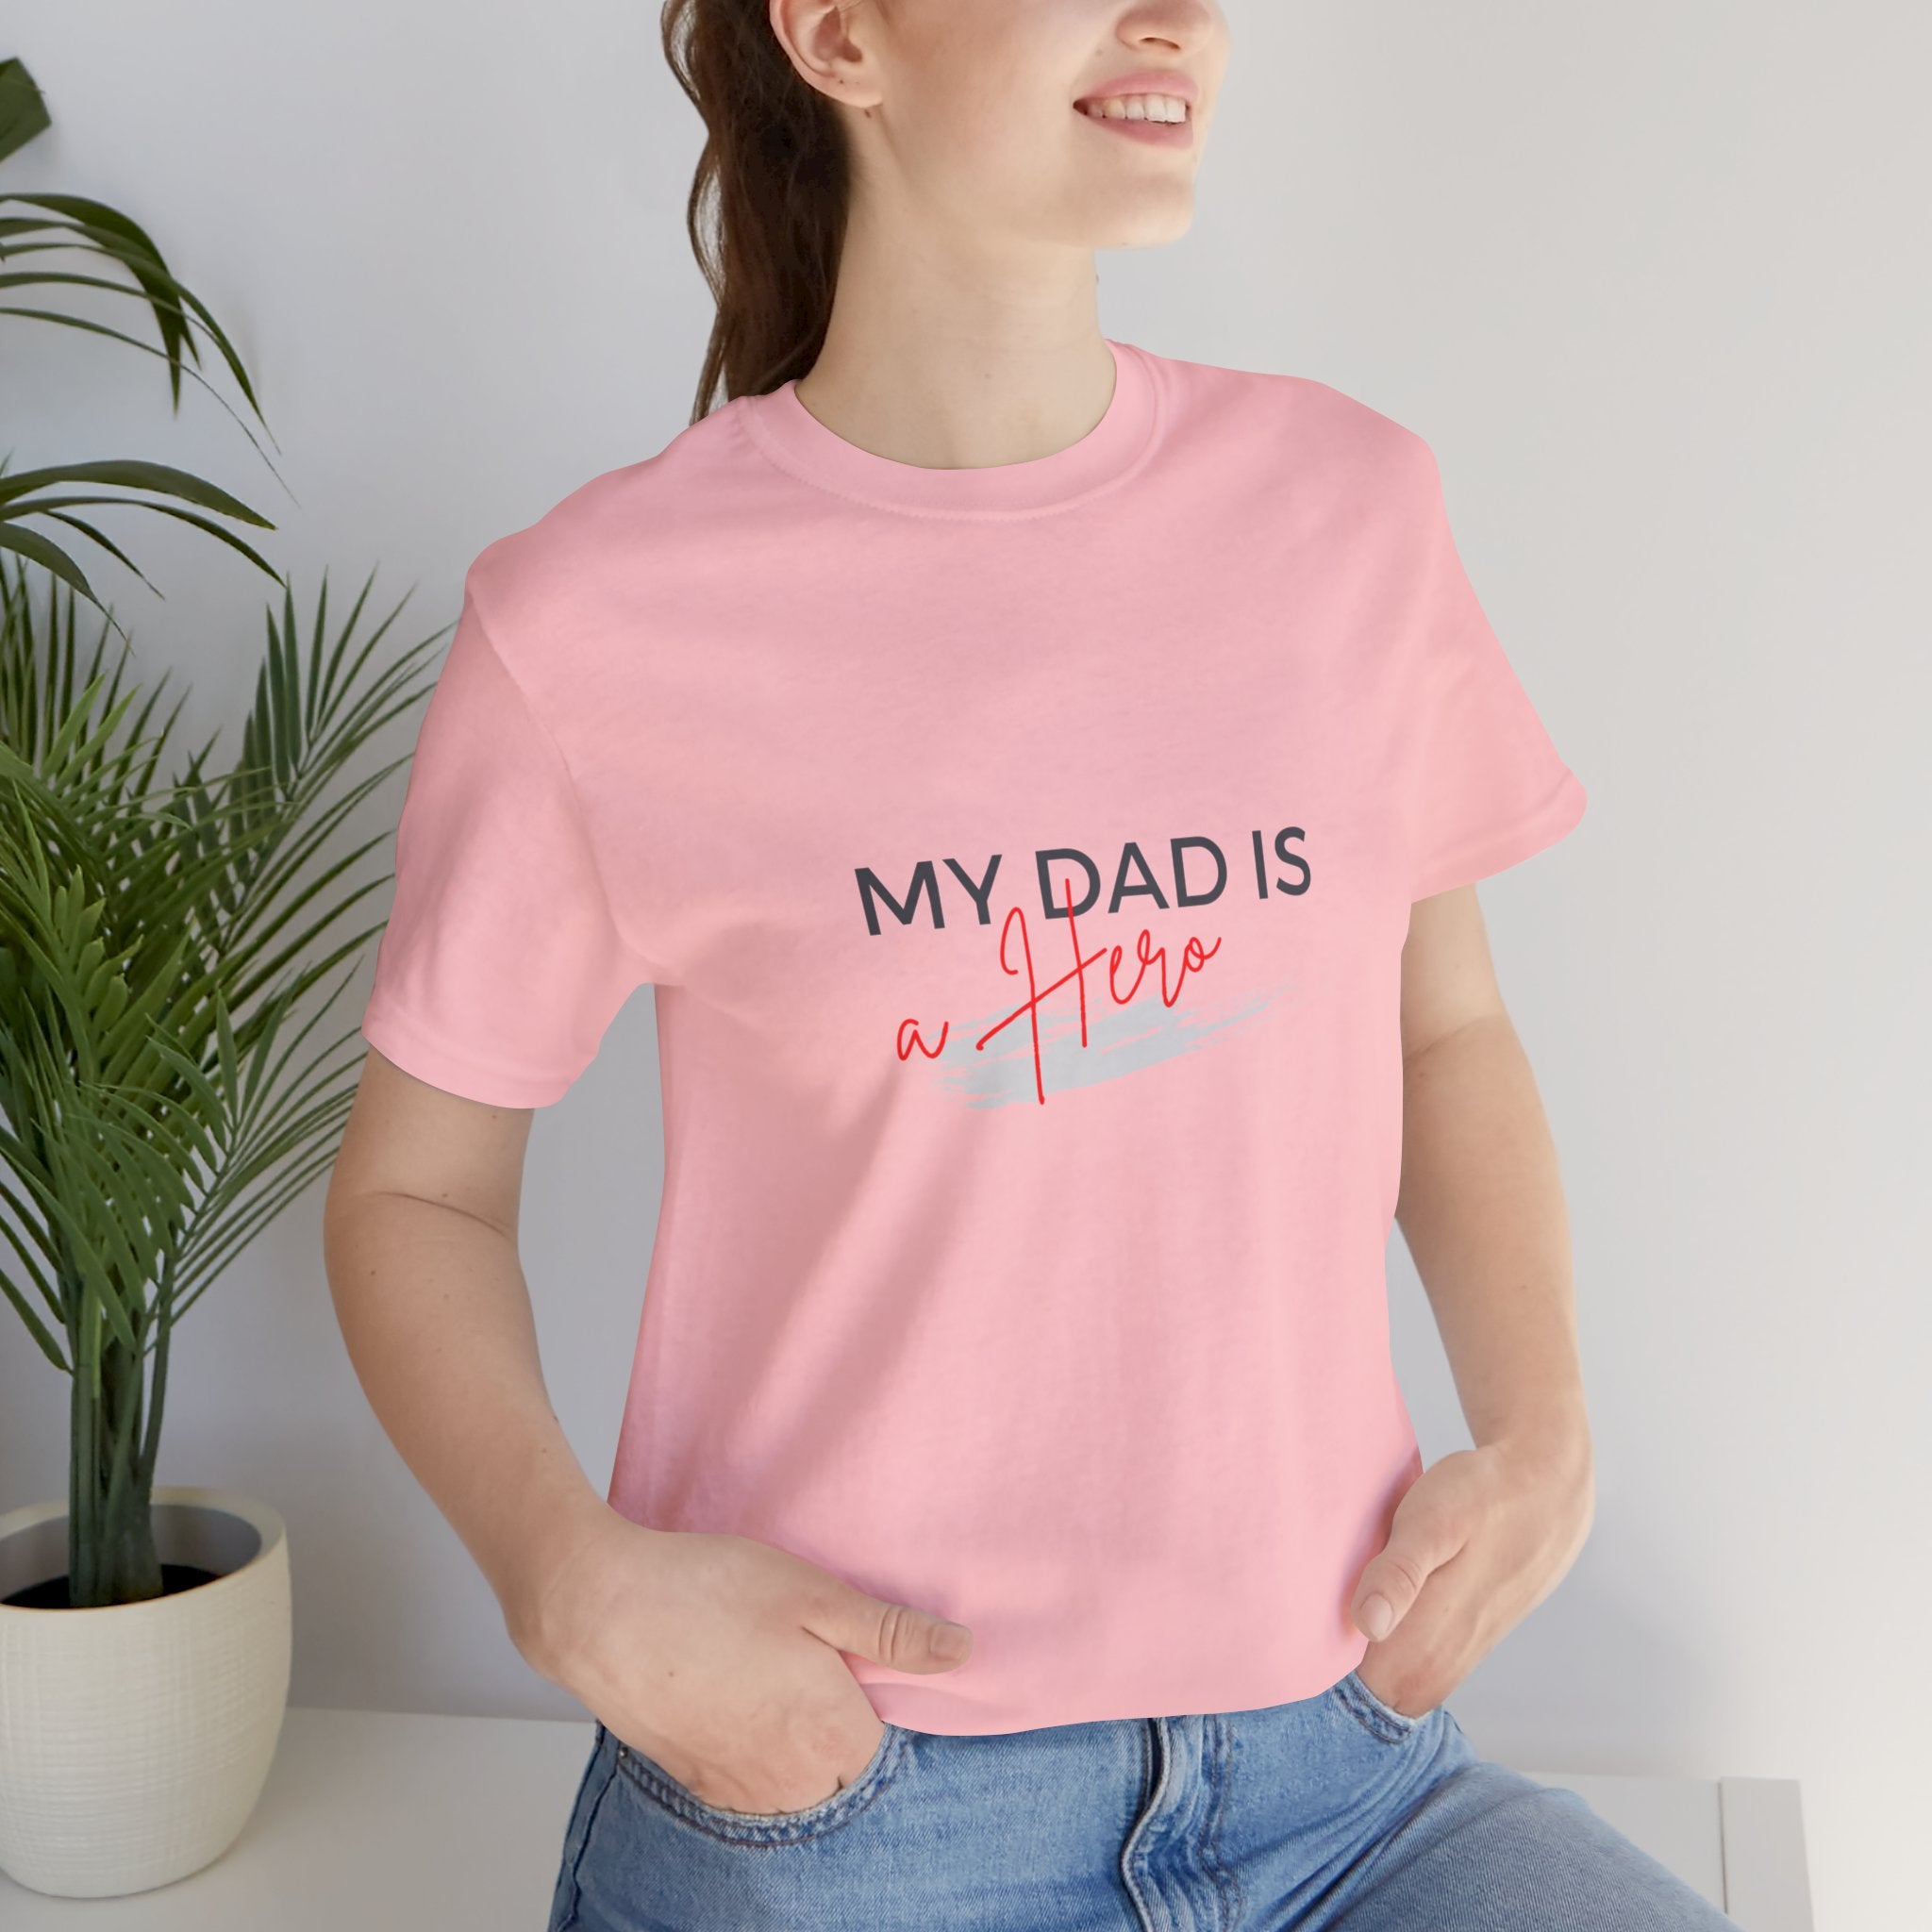 Fathers Day Crew Neck Tee, Unisex T-shirt, Regular Fit, Men's & Women's Clothing, Neck Labels